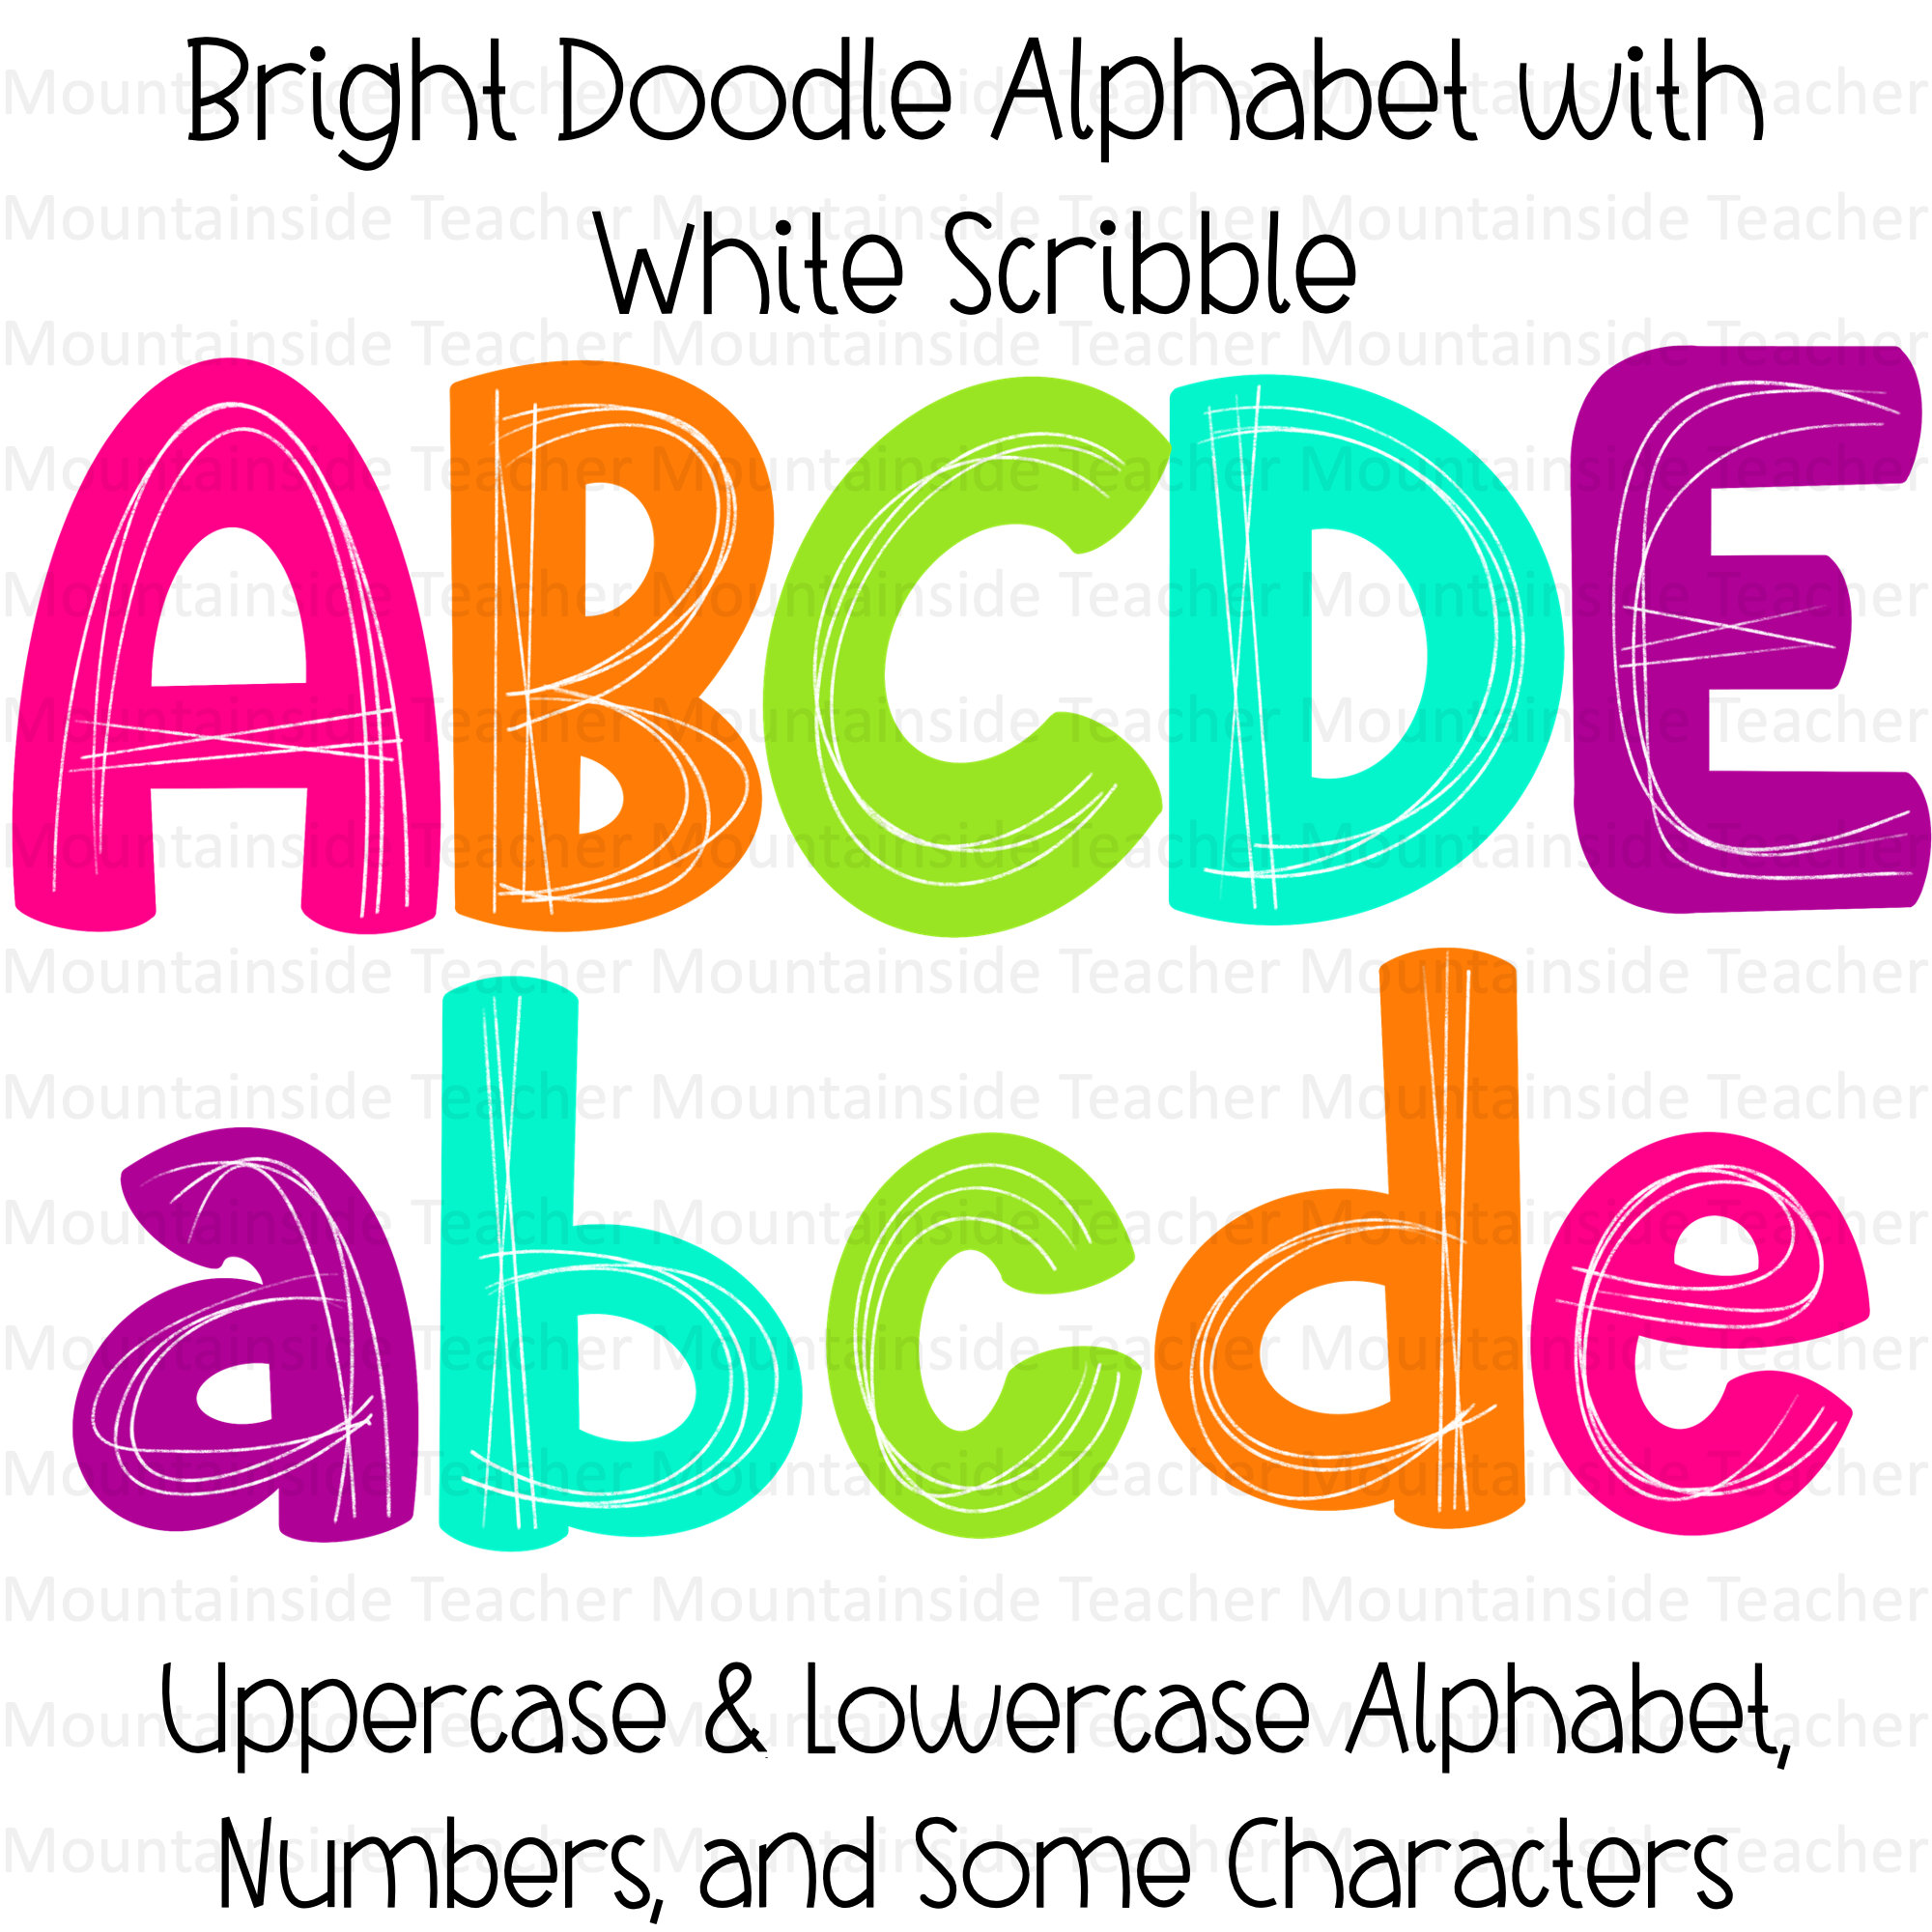 Complete Alphabet Lore Bundle Uppercase Lowercase & Number EPS SVG PNG Pdf  Blank and Colorful Alphabet Lore Digital Alphabet -  Finland